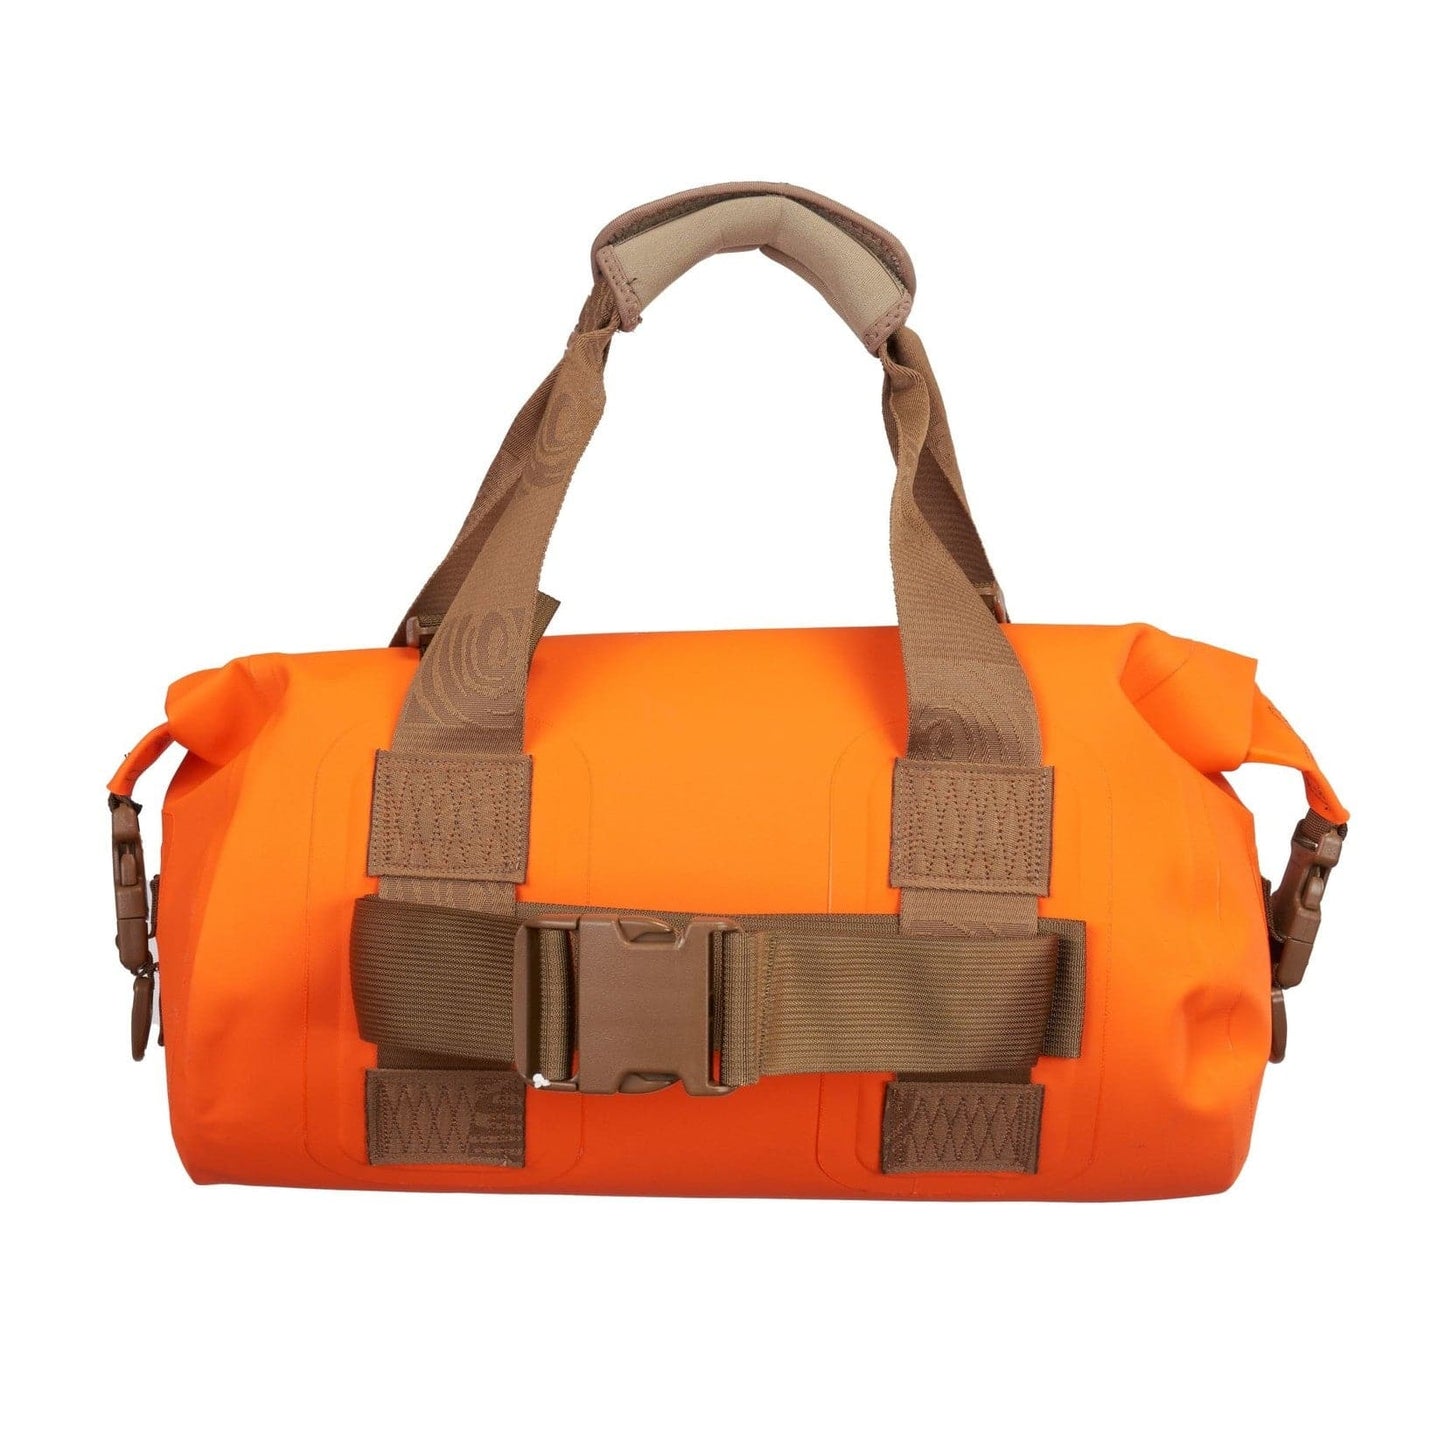 A Watershed Goforth Duffel bag with two straps.